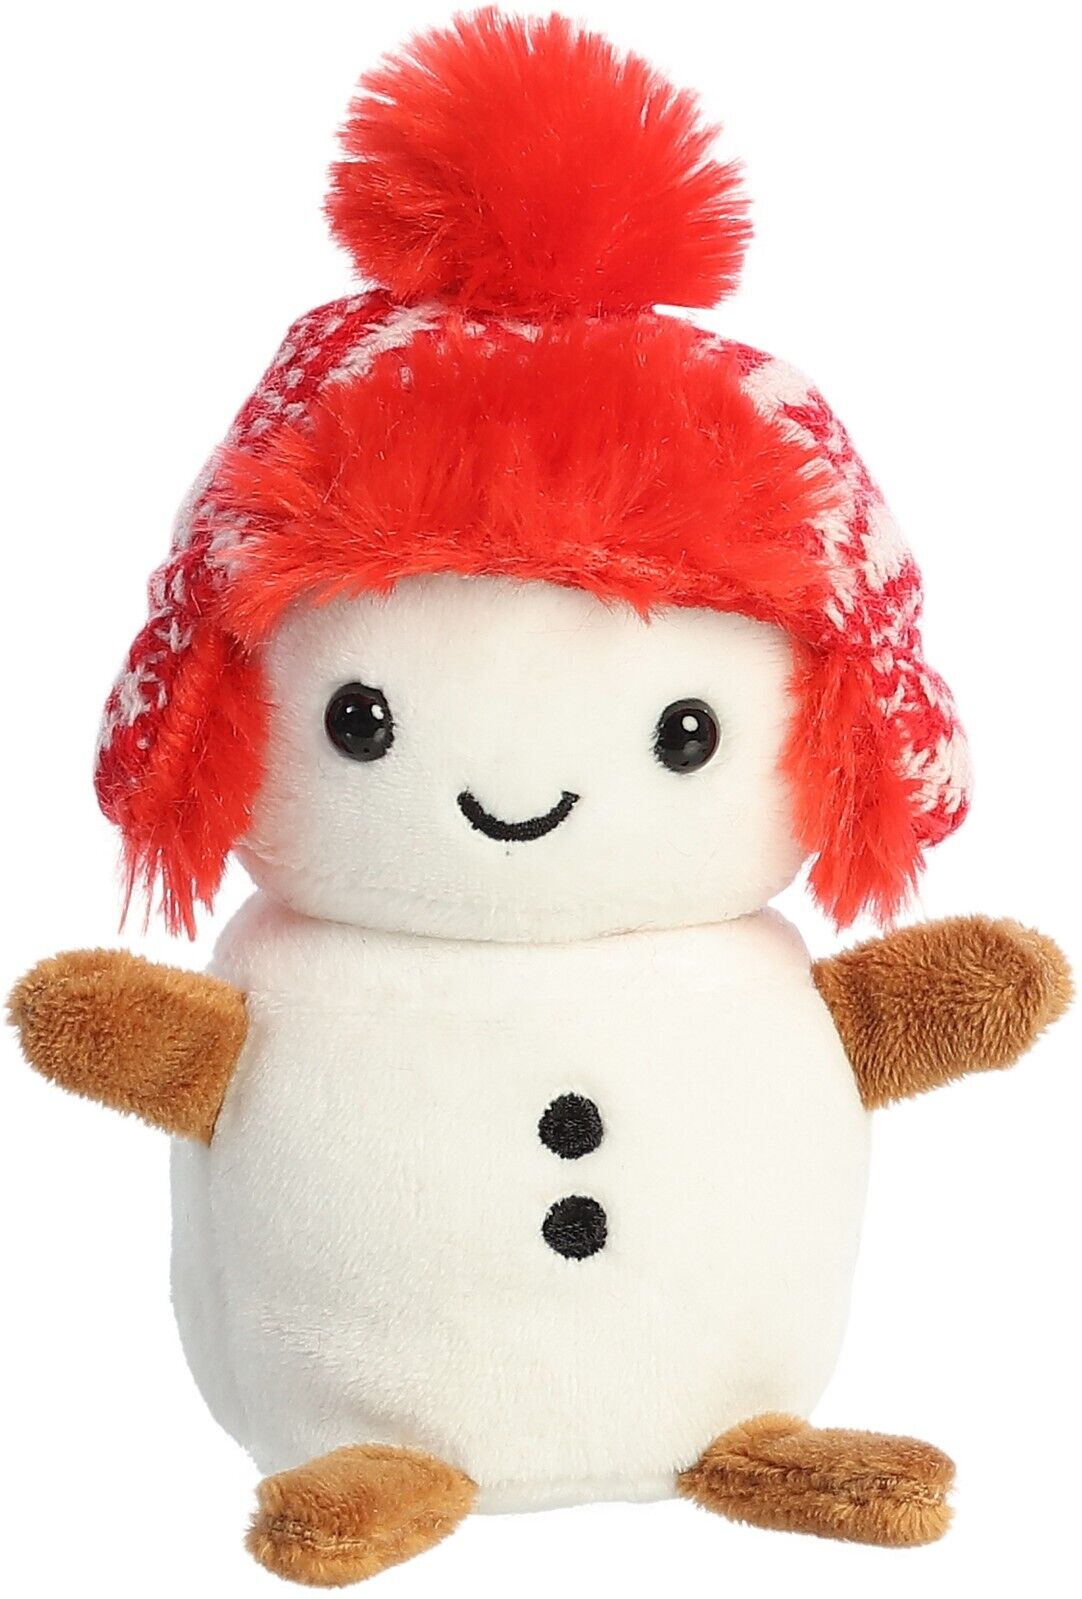 Peeking behind a pile of snow, Lil' Flurry comes out to play! Lil' Flurry is a tiny snowman friend with little twig arms and a small red beanie snug atop its head